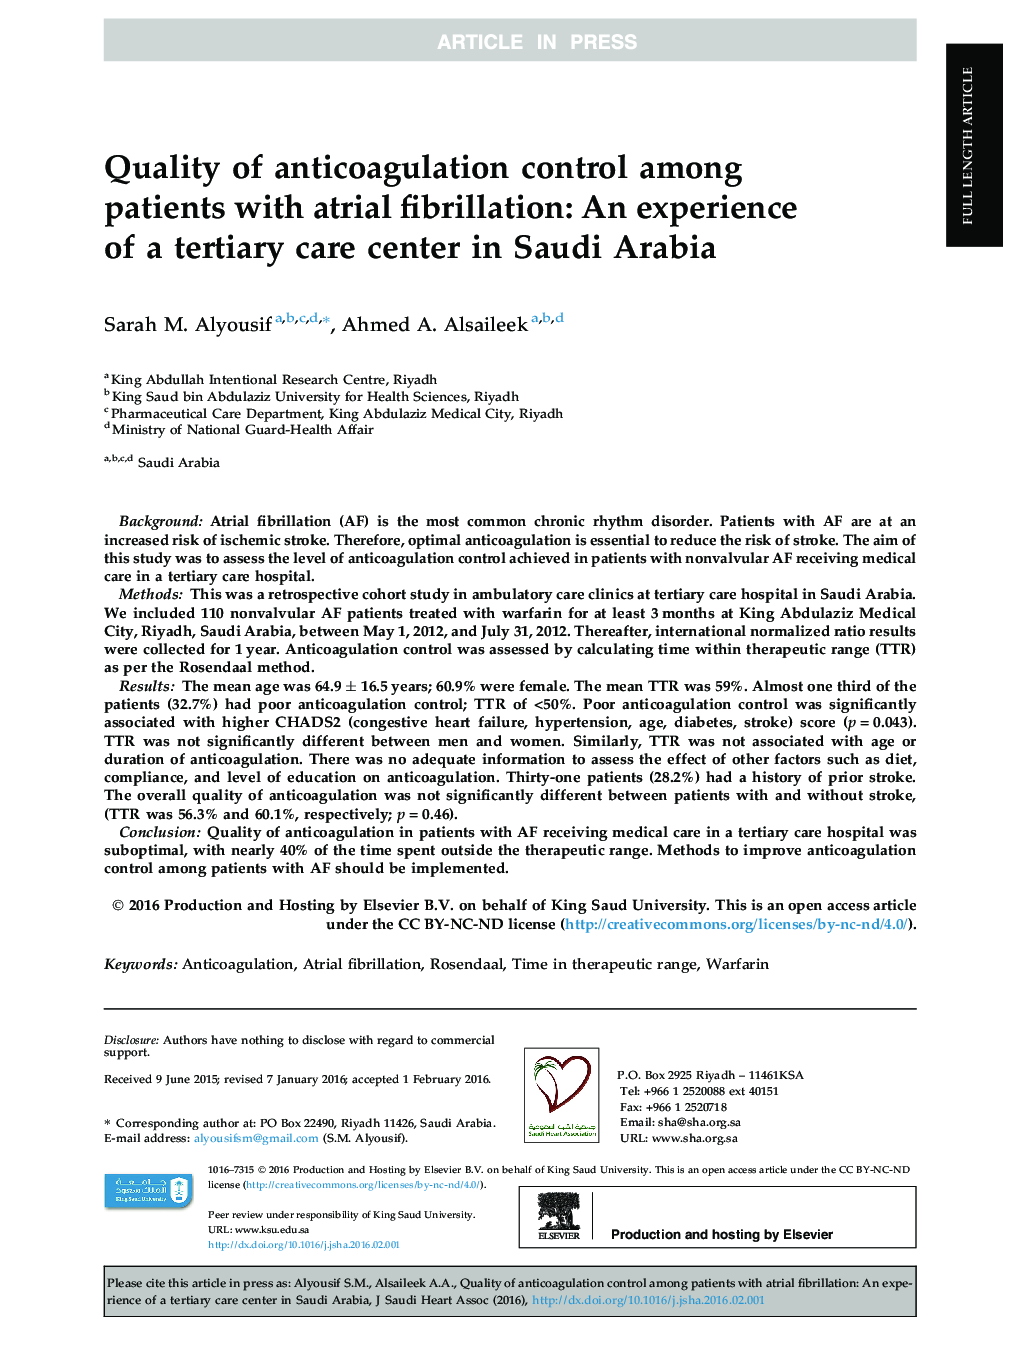 Quality of anticoagulation control among patients with atrial fibrillation: An experience of a tertiary care center in Saudi Arabia